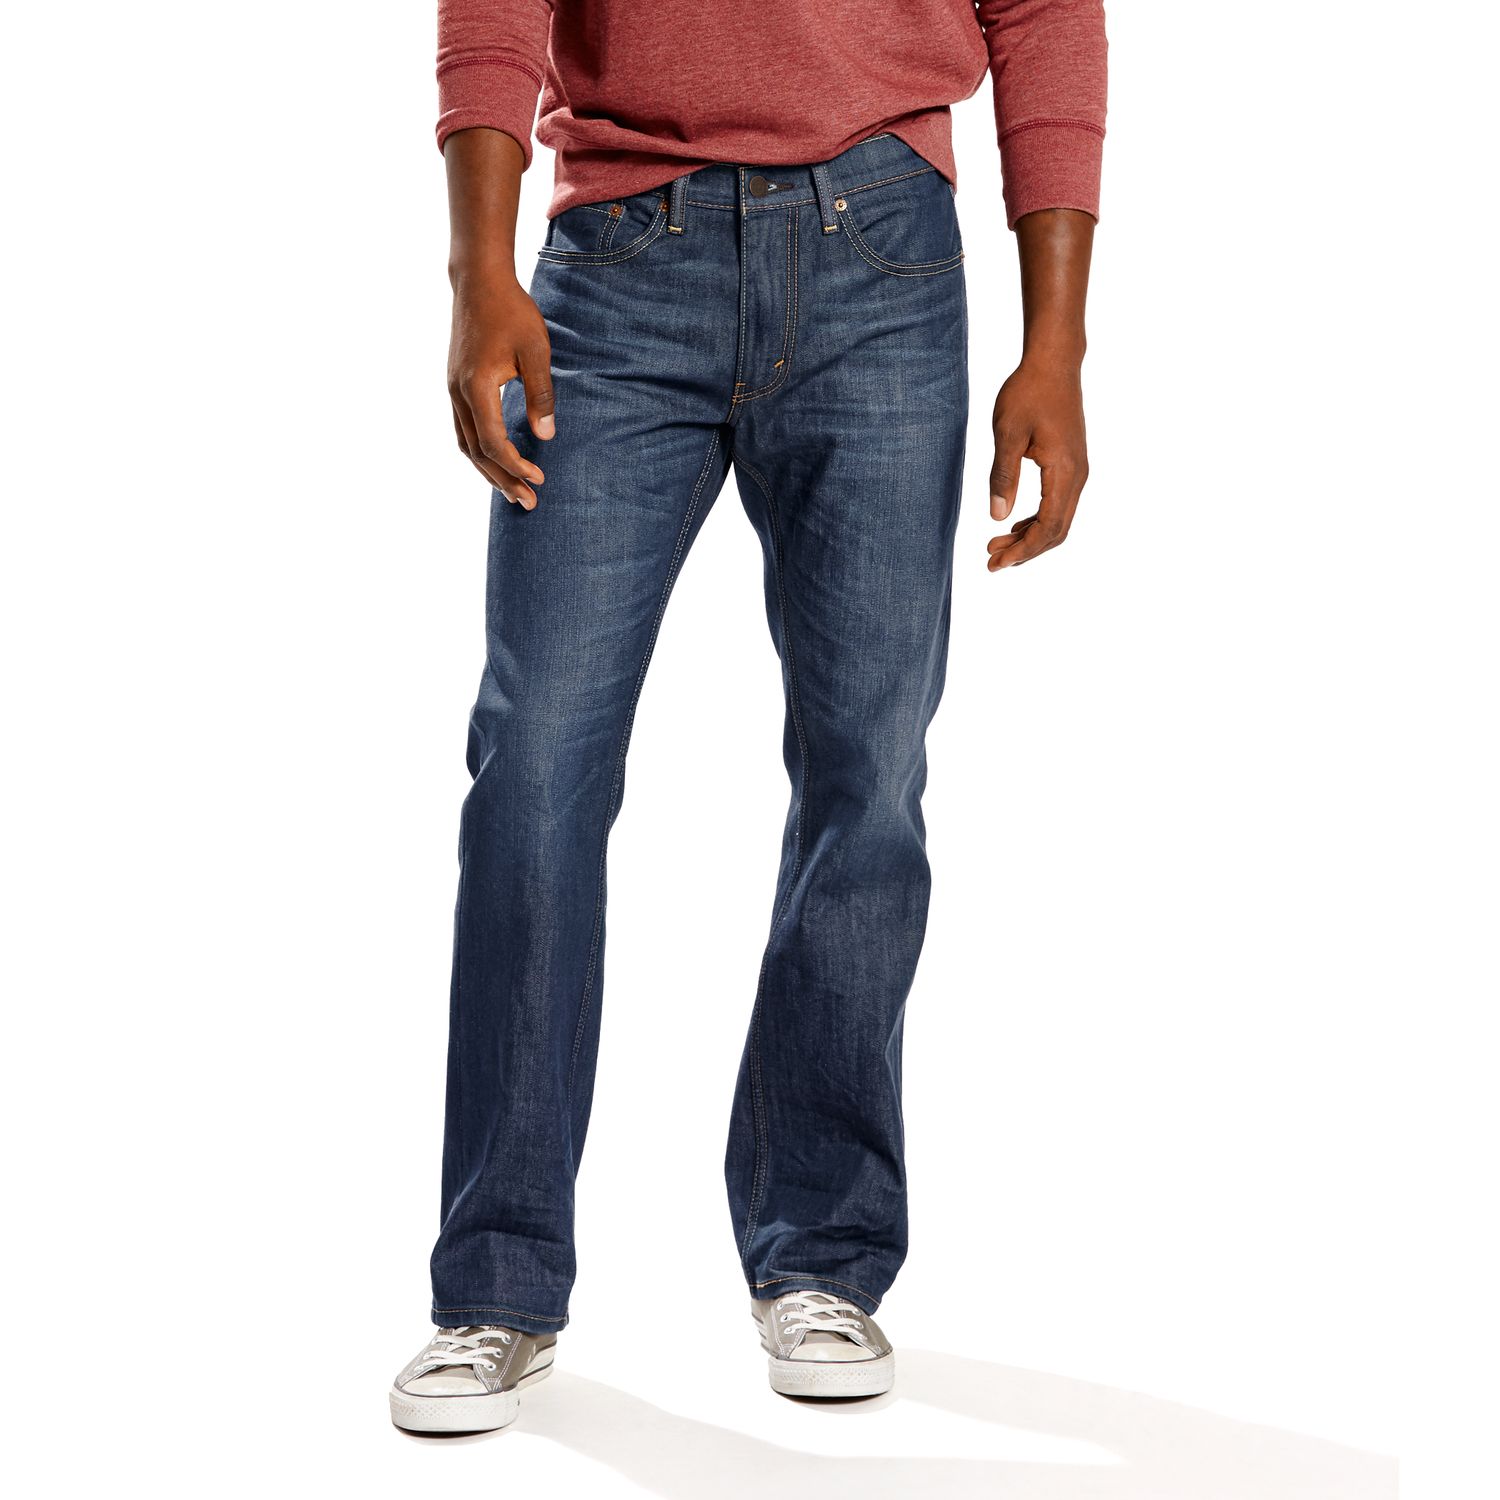 Image for Levi's Men's 559™ Stretch Relaxed Straight Fit Jeans at Kohl's.